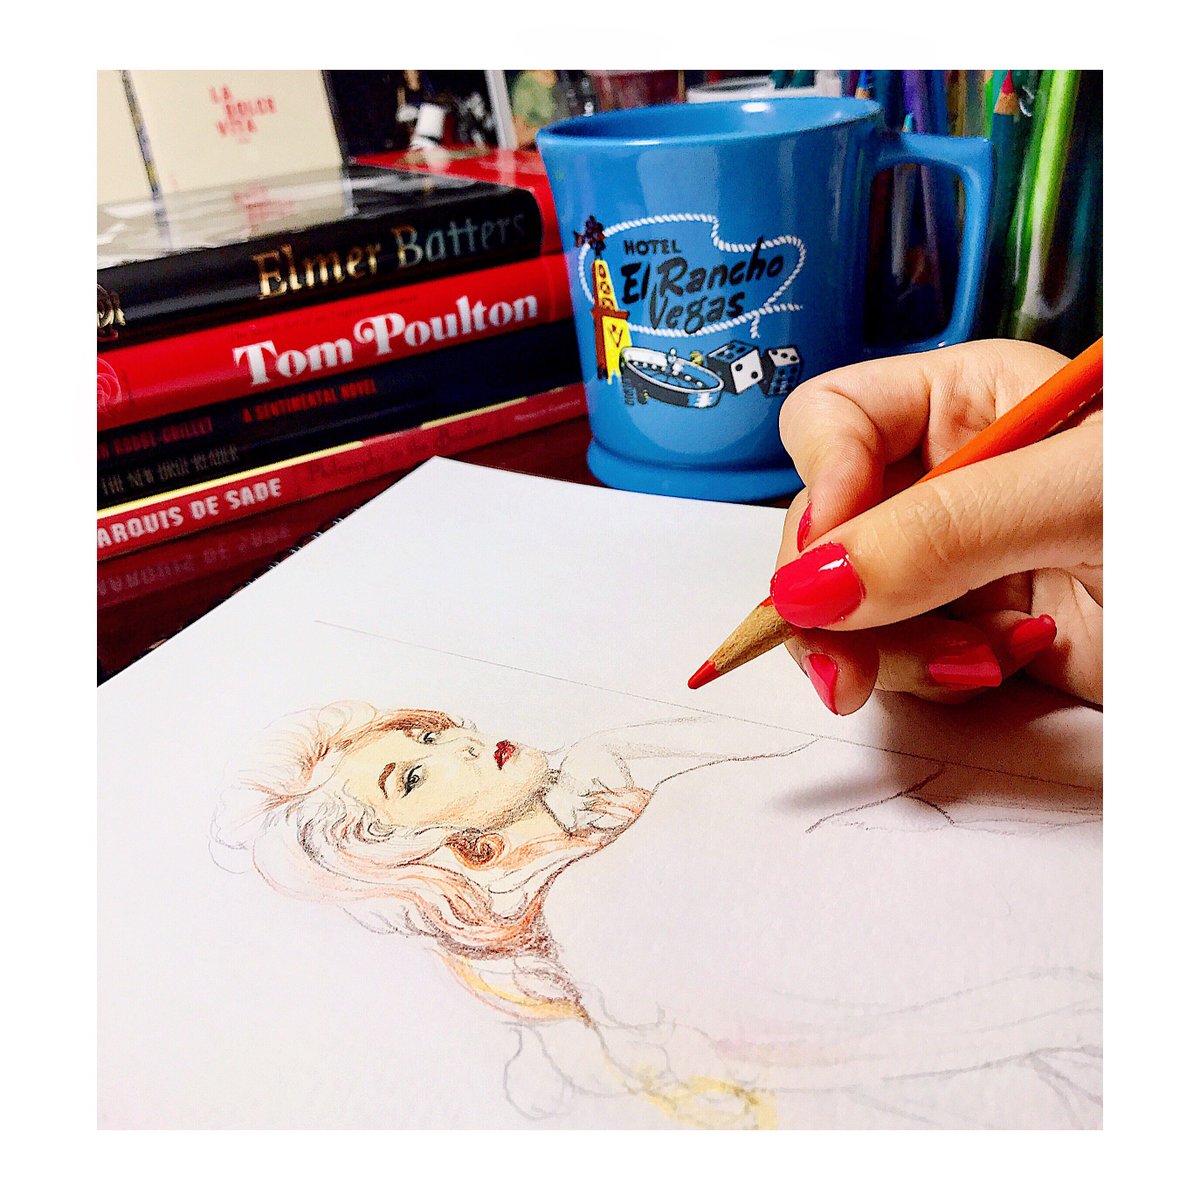 Listening to Earth, Wind & Fire, drinking coffee from my favorite mug which I got in Vegas, & sketching this redheaded pinup🔥🖍☕️ #pinup #pinupartist #wip #workinprogress #sketch #sketching #colorpencil #illustration #coffee #redhead #fall #autumn #vintage #retro #art #drawing